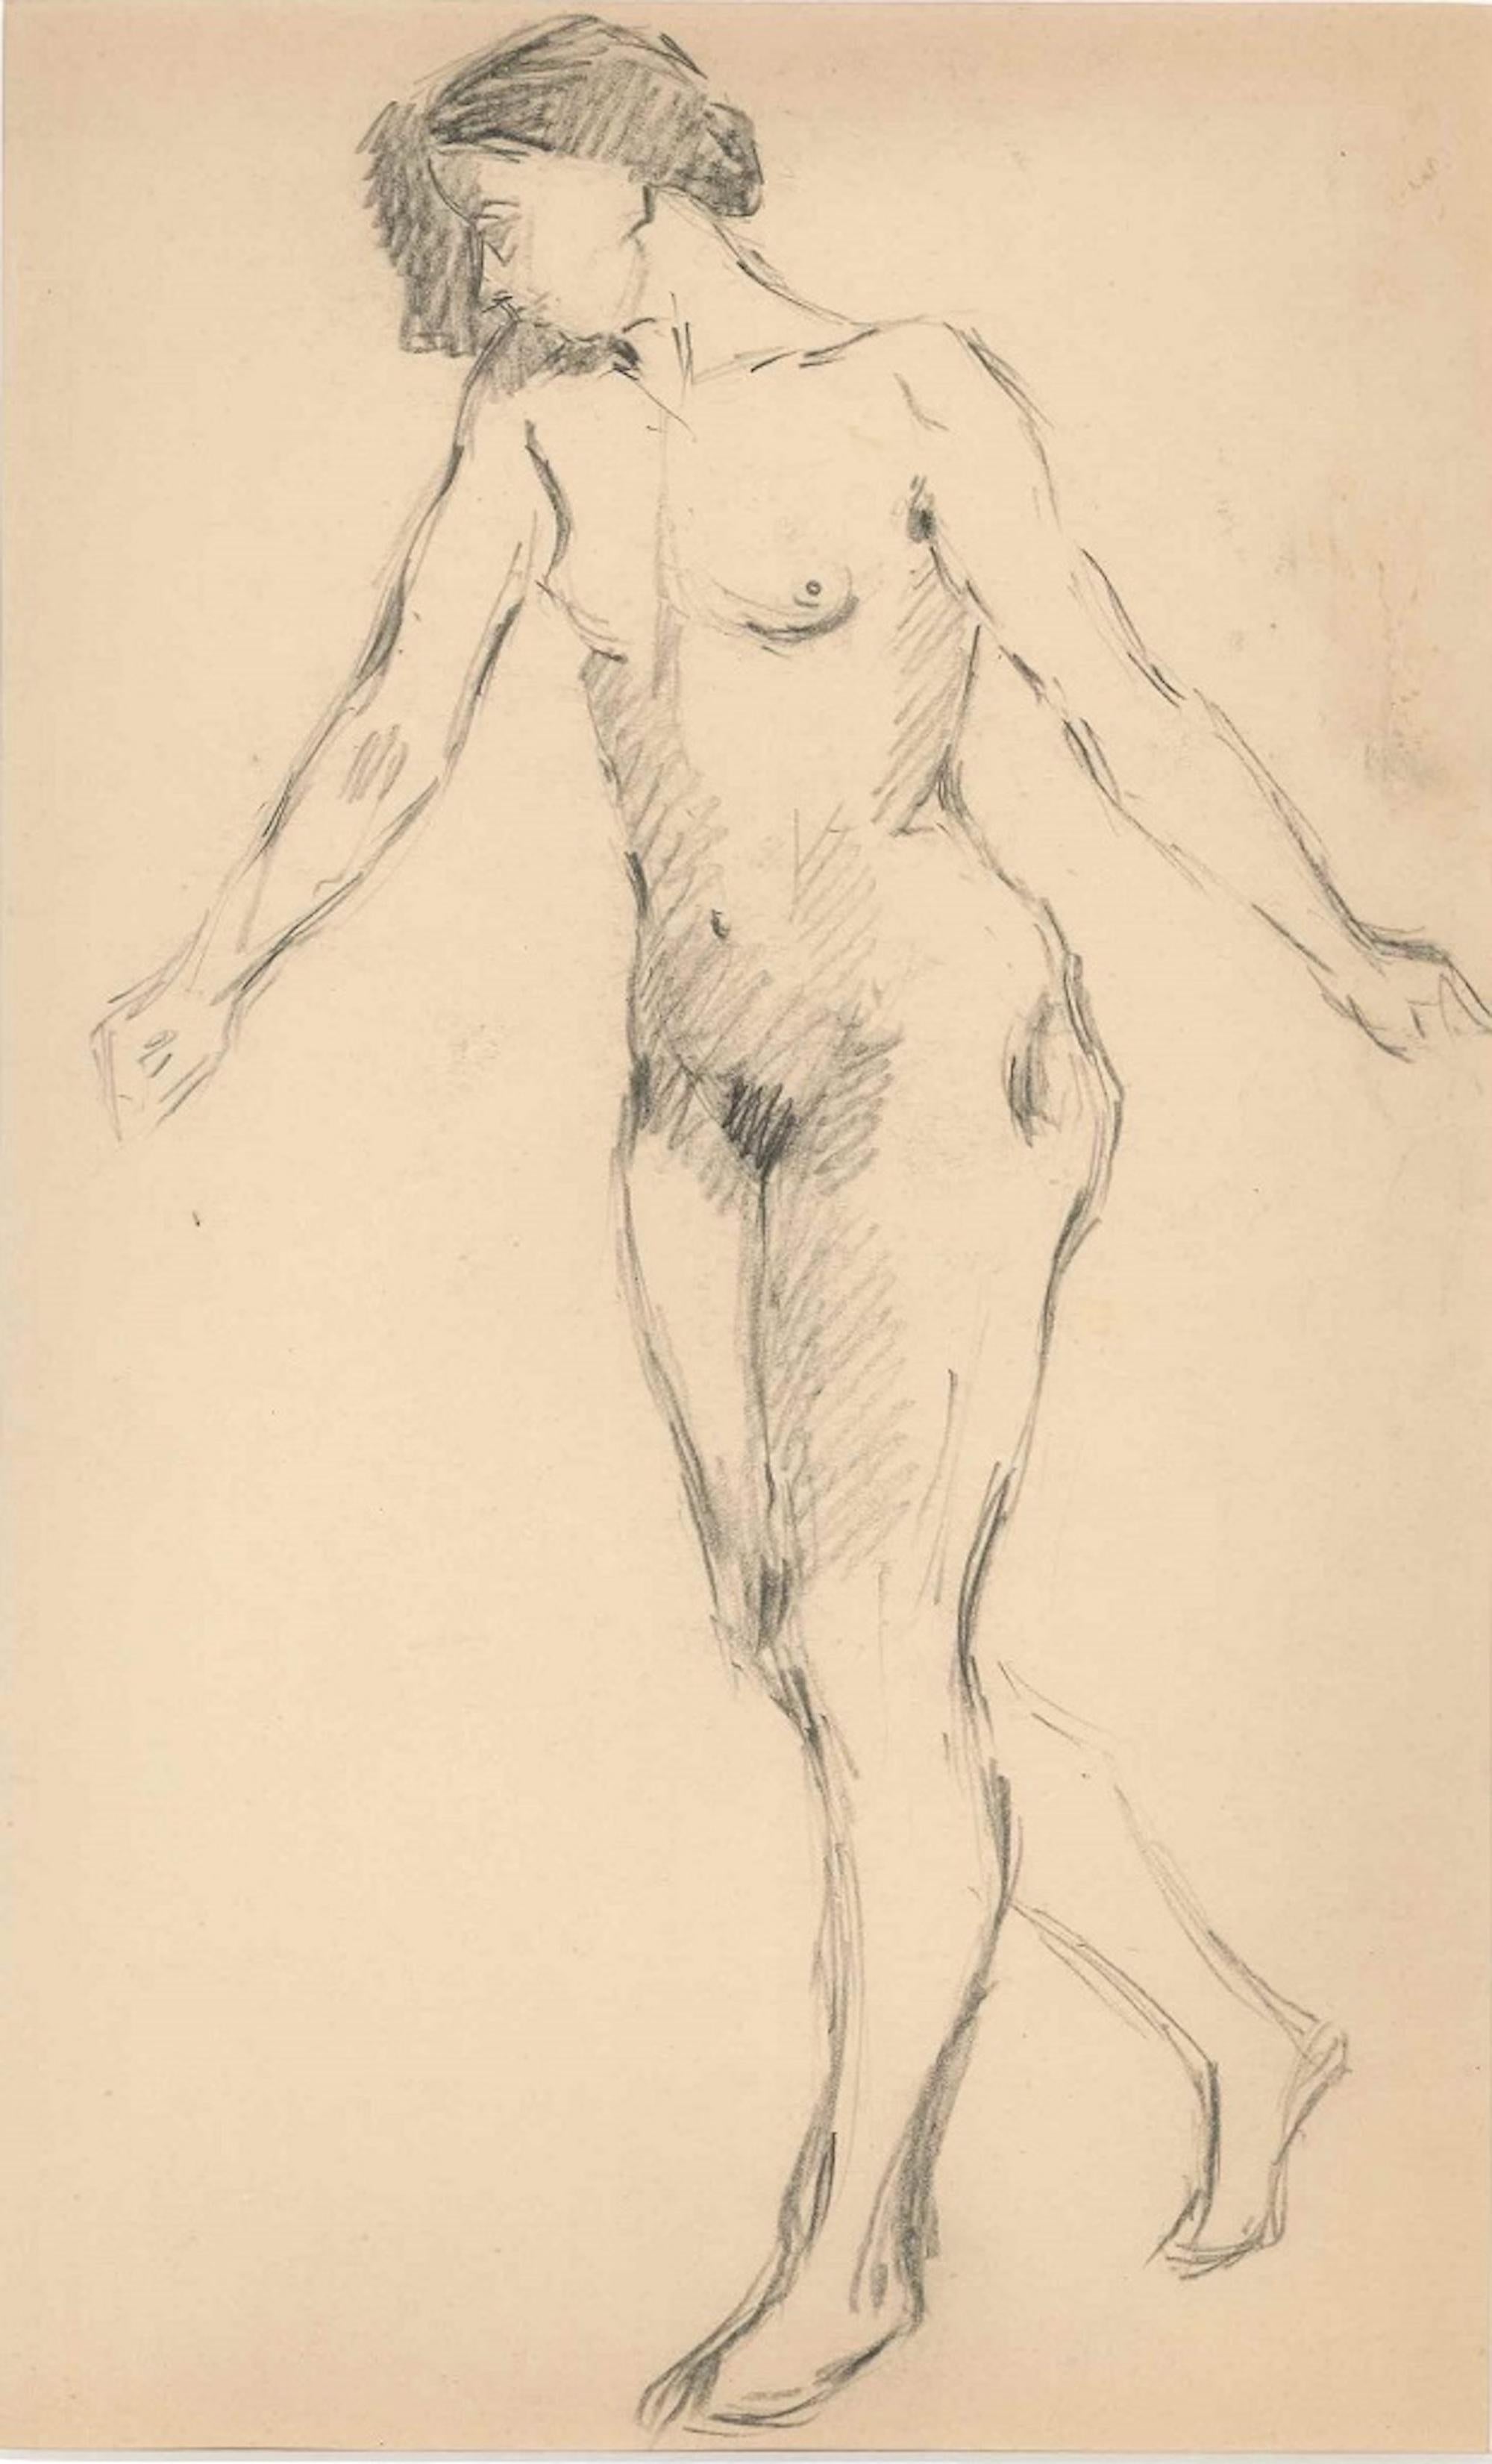 Female Nude Figure in Profile  - Original Drawing - Early 20th Century